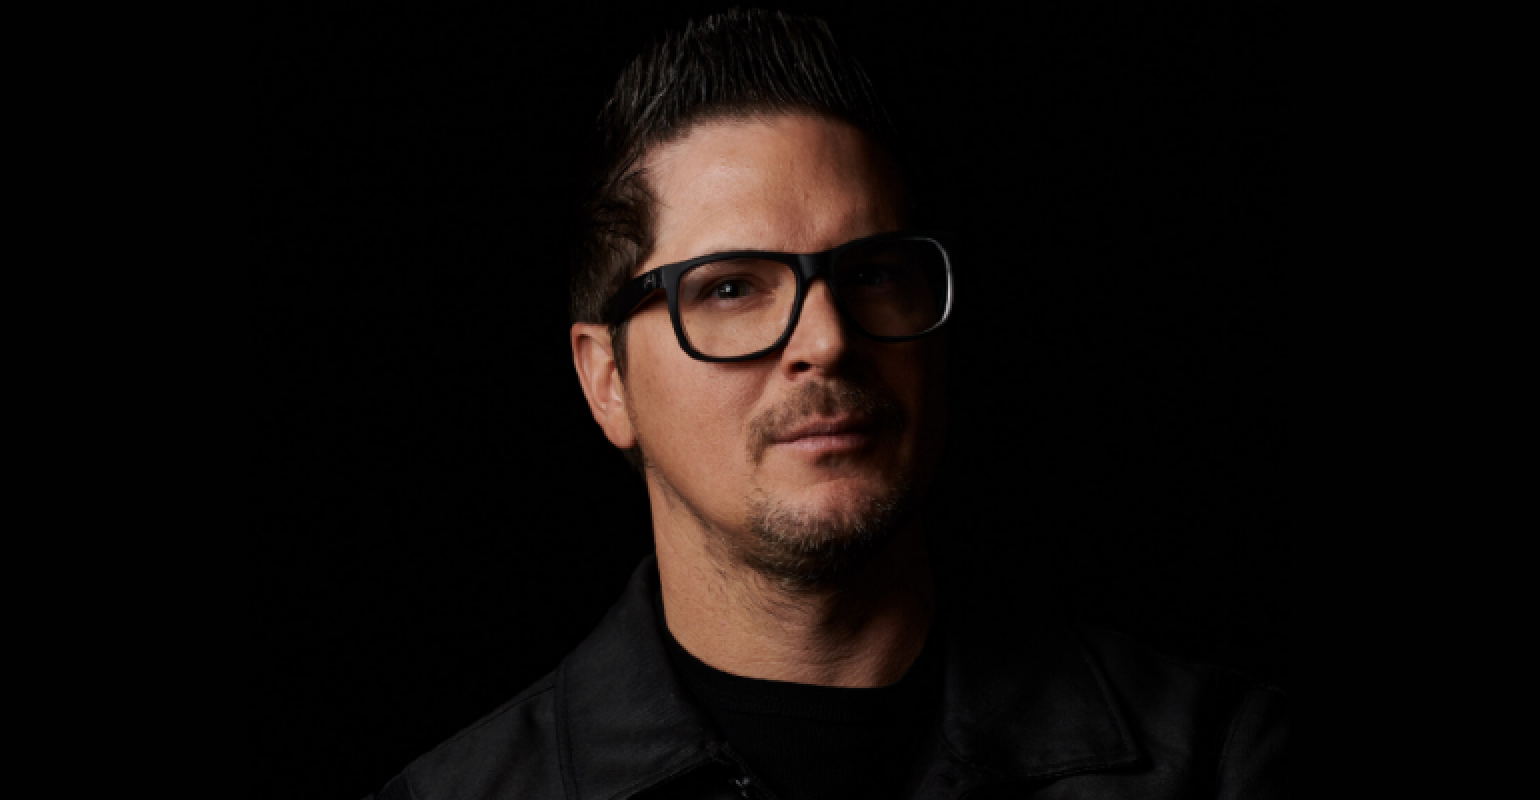 Zak Bagans Net Worth 2020 The Event Chronicle